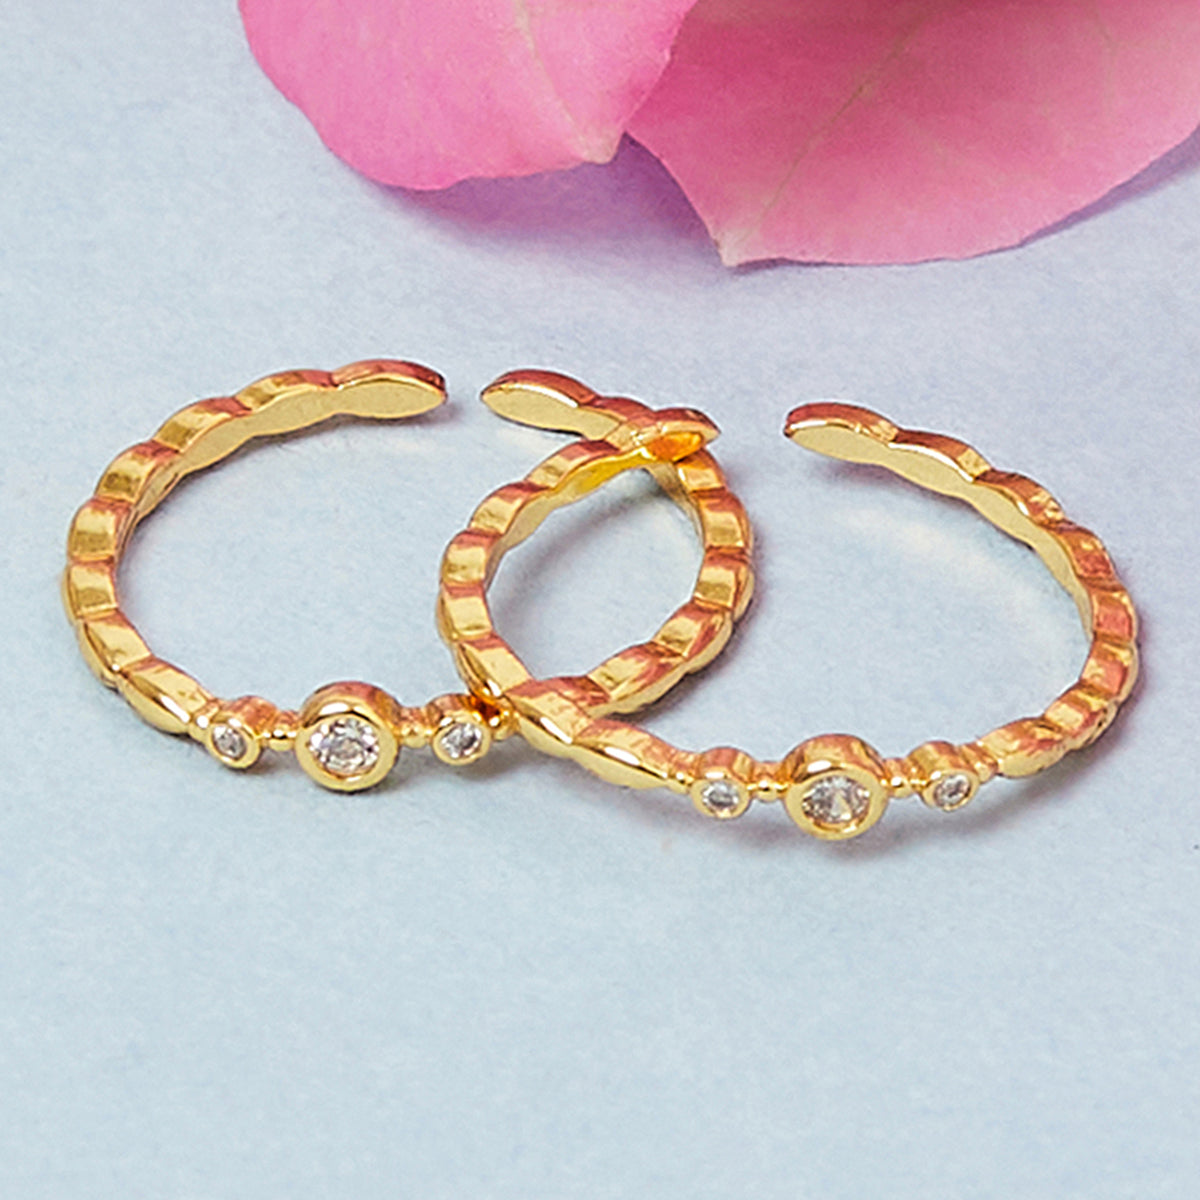 Classic Gold Plated Toe Rings